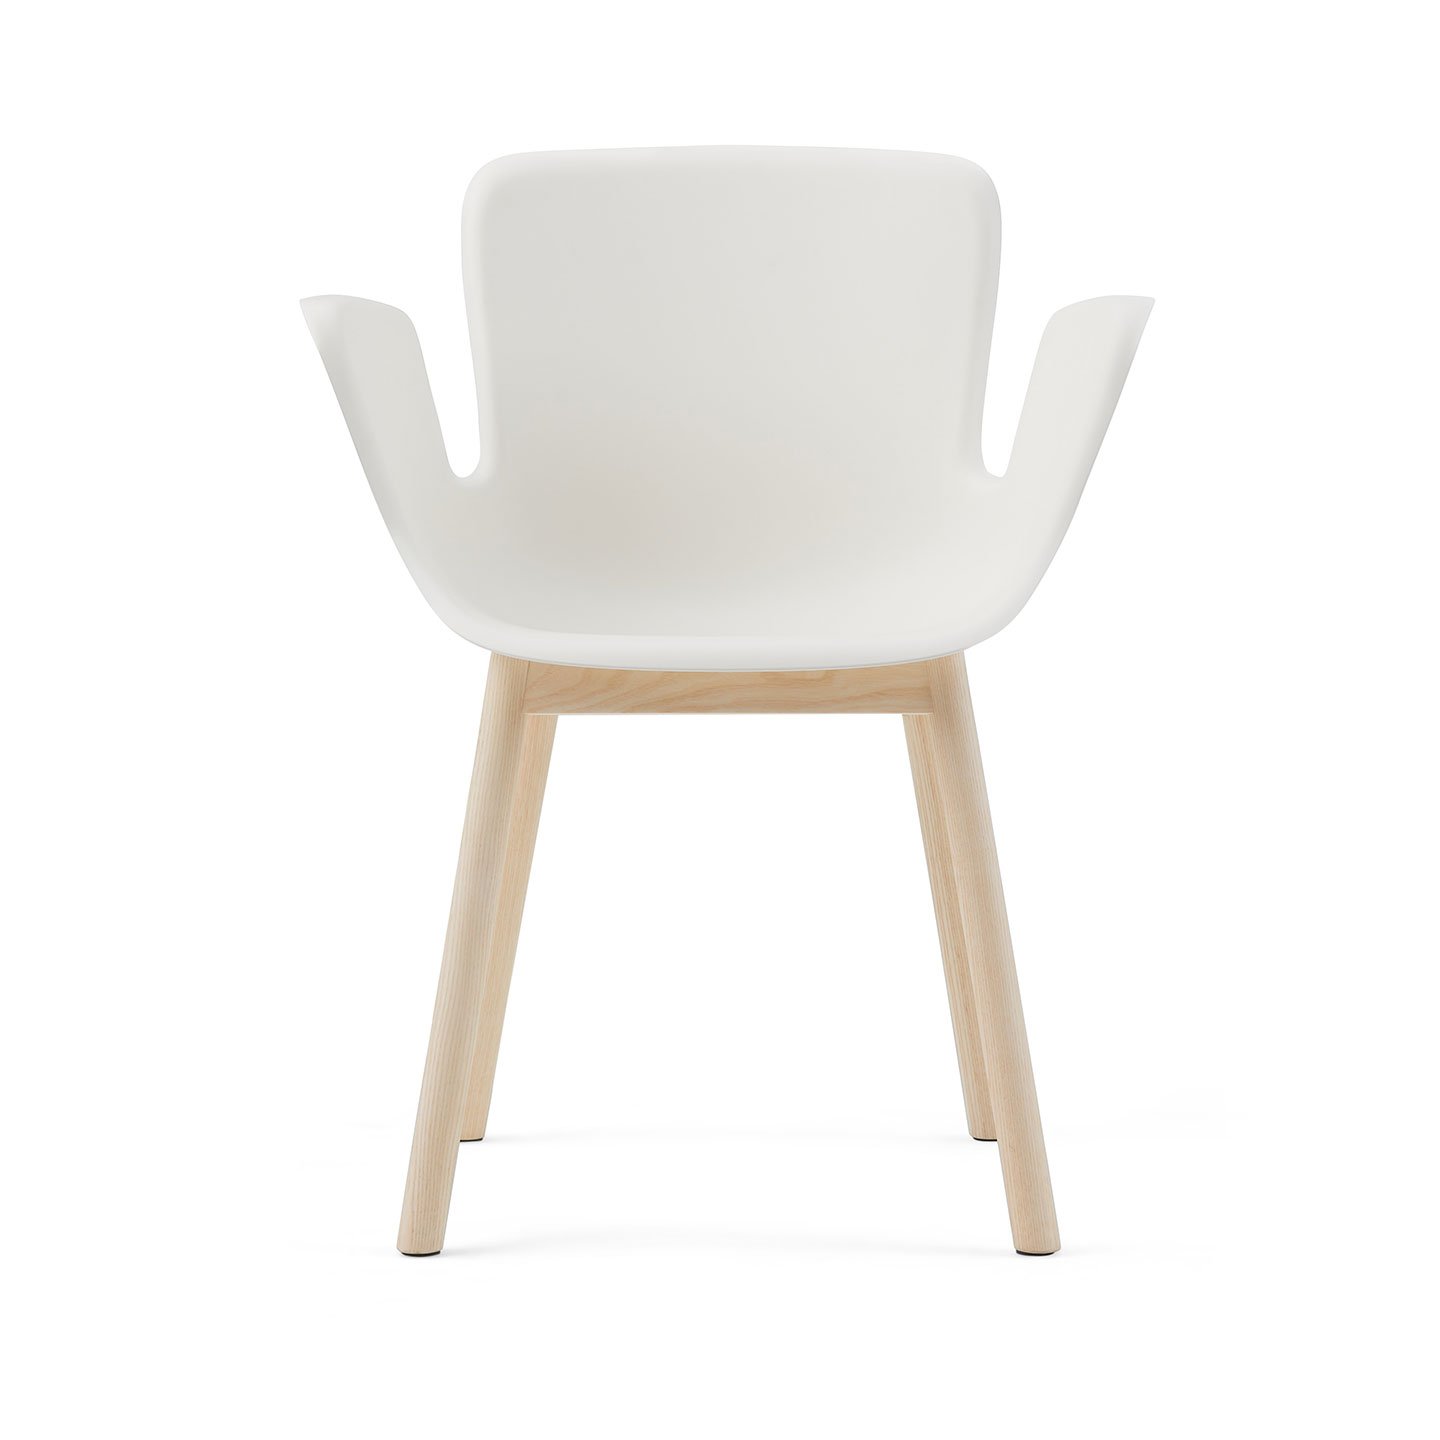 Haworth Juli Plastic chair in white color with wooden base and legs front view